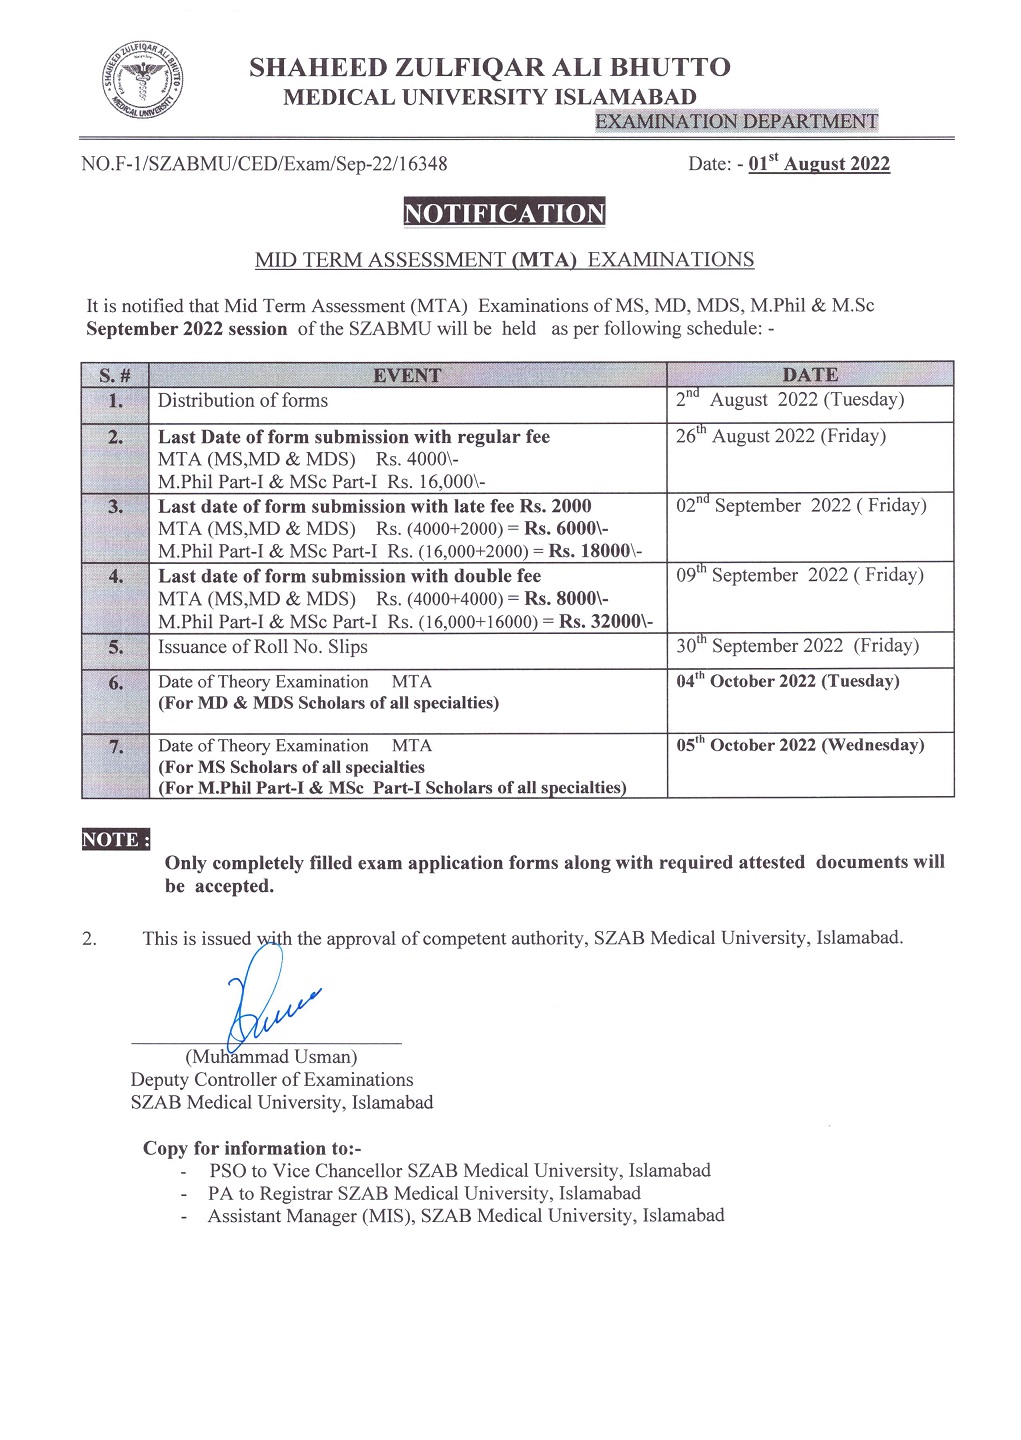 Notification -  MID Term Assessment (MTA) Examinations of MS, MD, MDS, M.phil & MSc September 2022 session